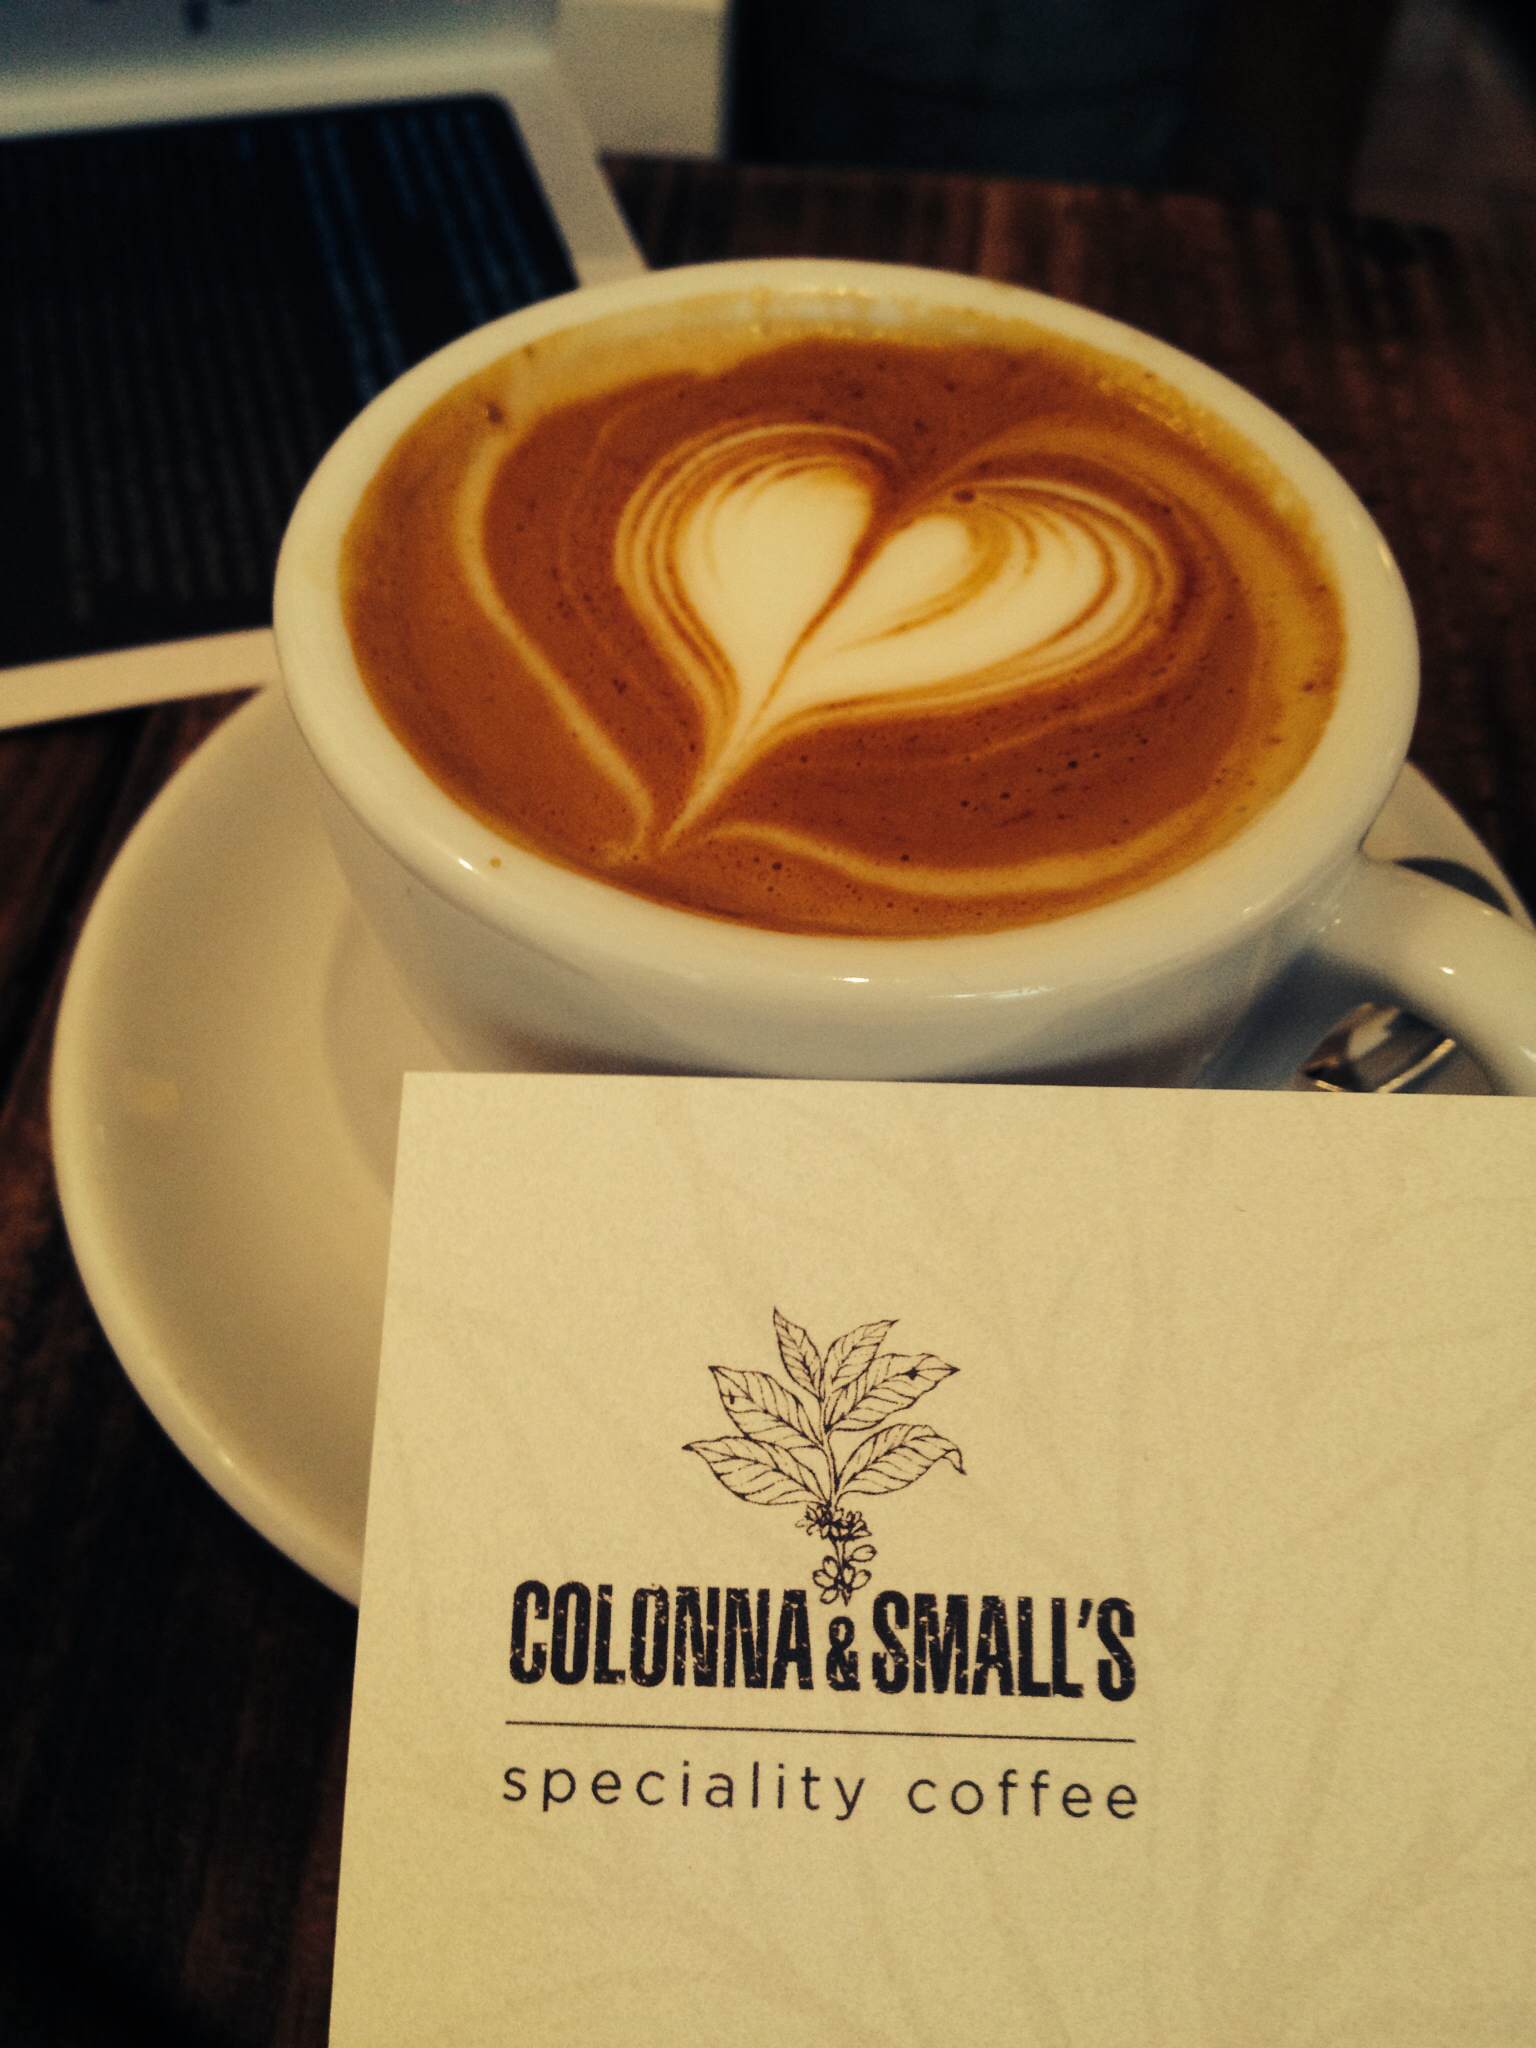 Colonna & Small's speciality coffee in Bath, UK.